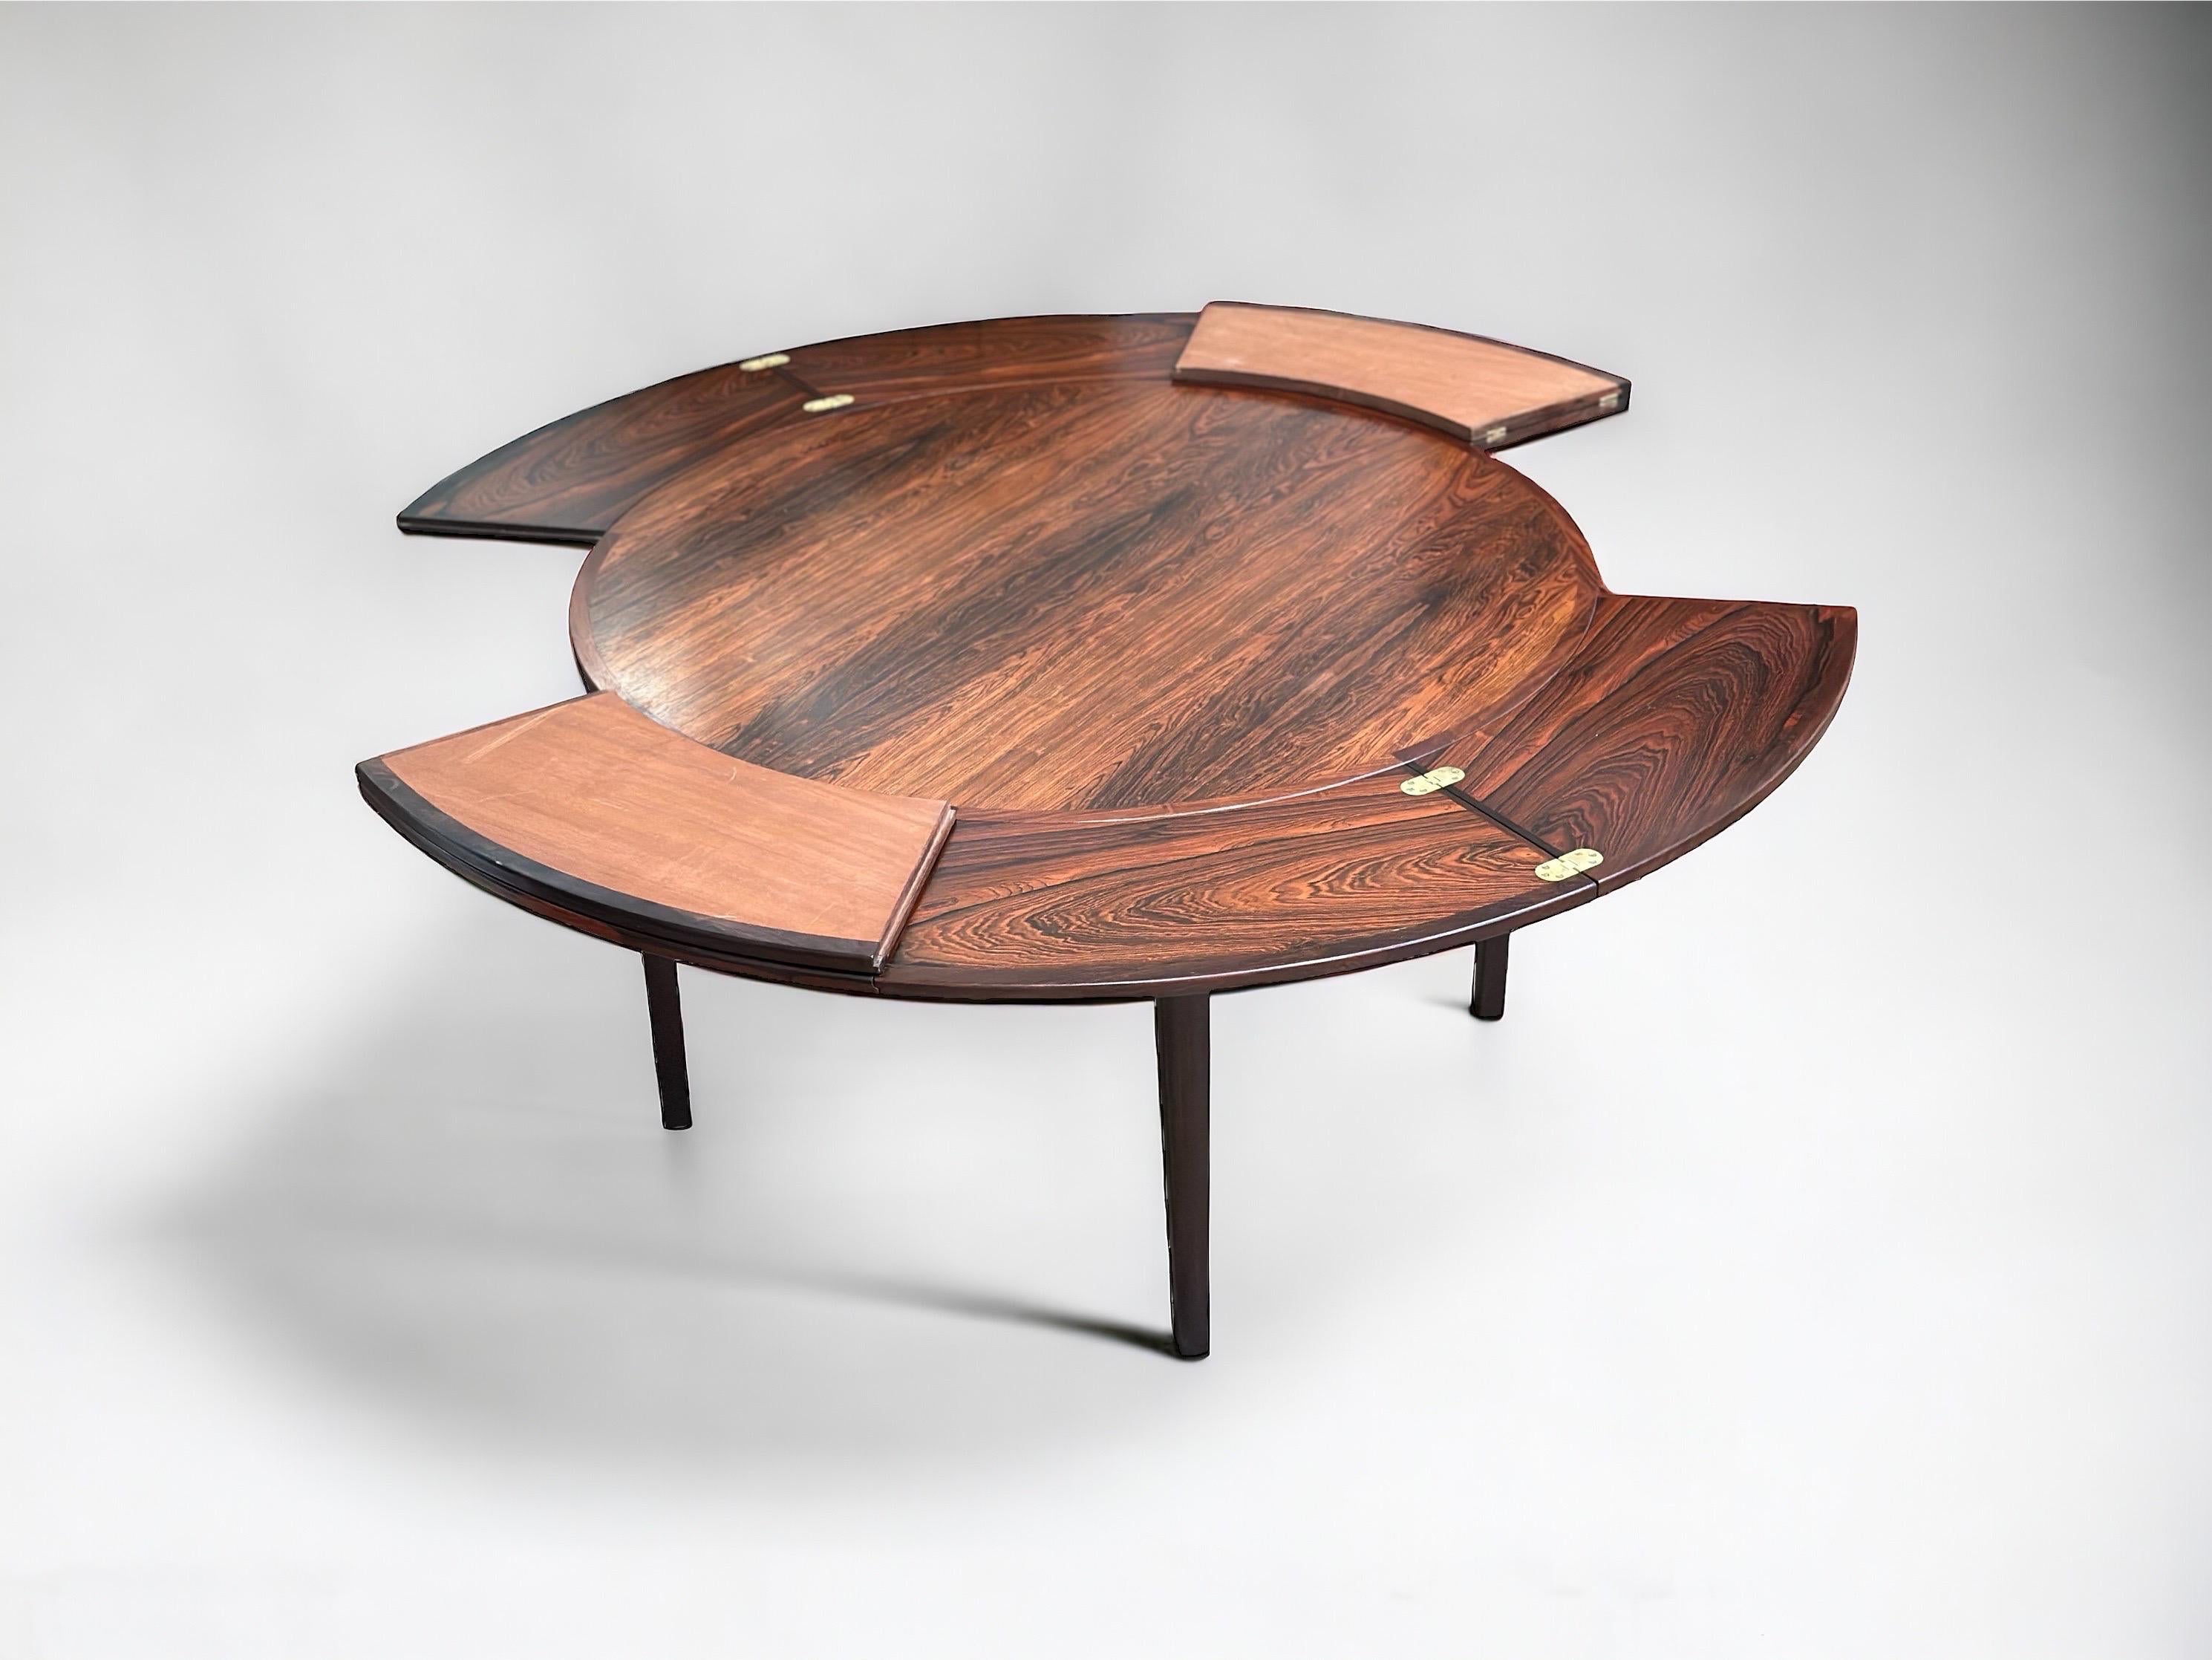 Late 20th Century Dyrlund Lotus Table - Danish Rosewood Flip Flap Expanding Round Dining Table